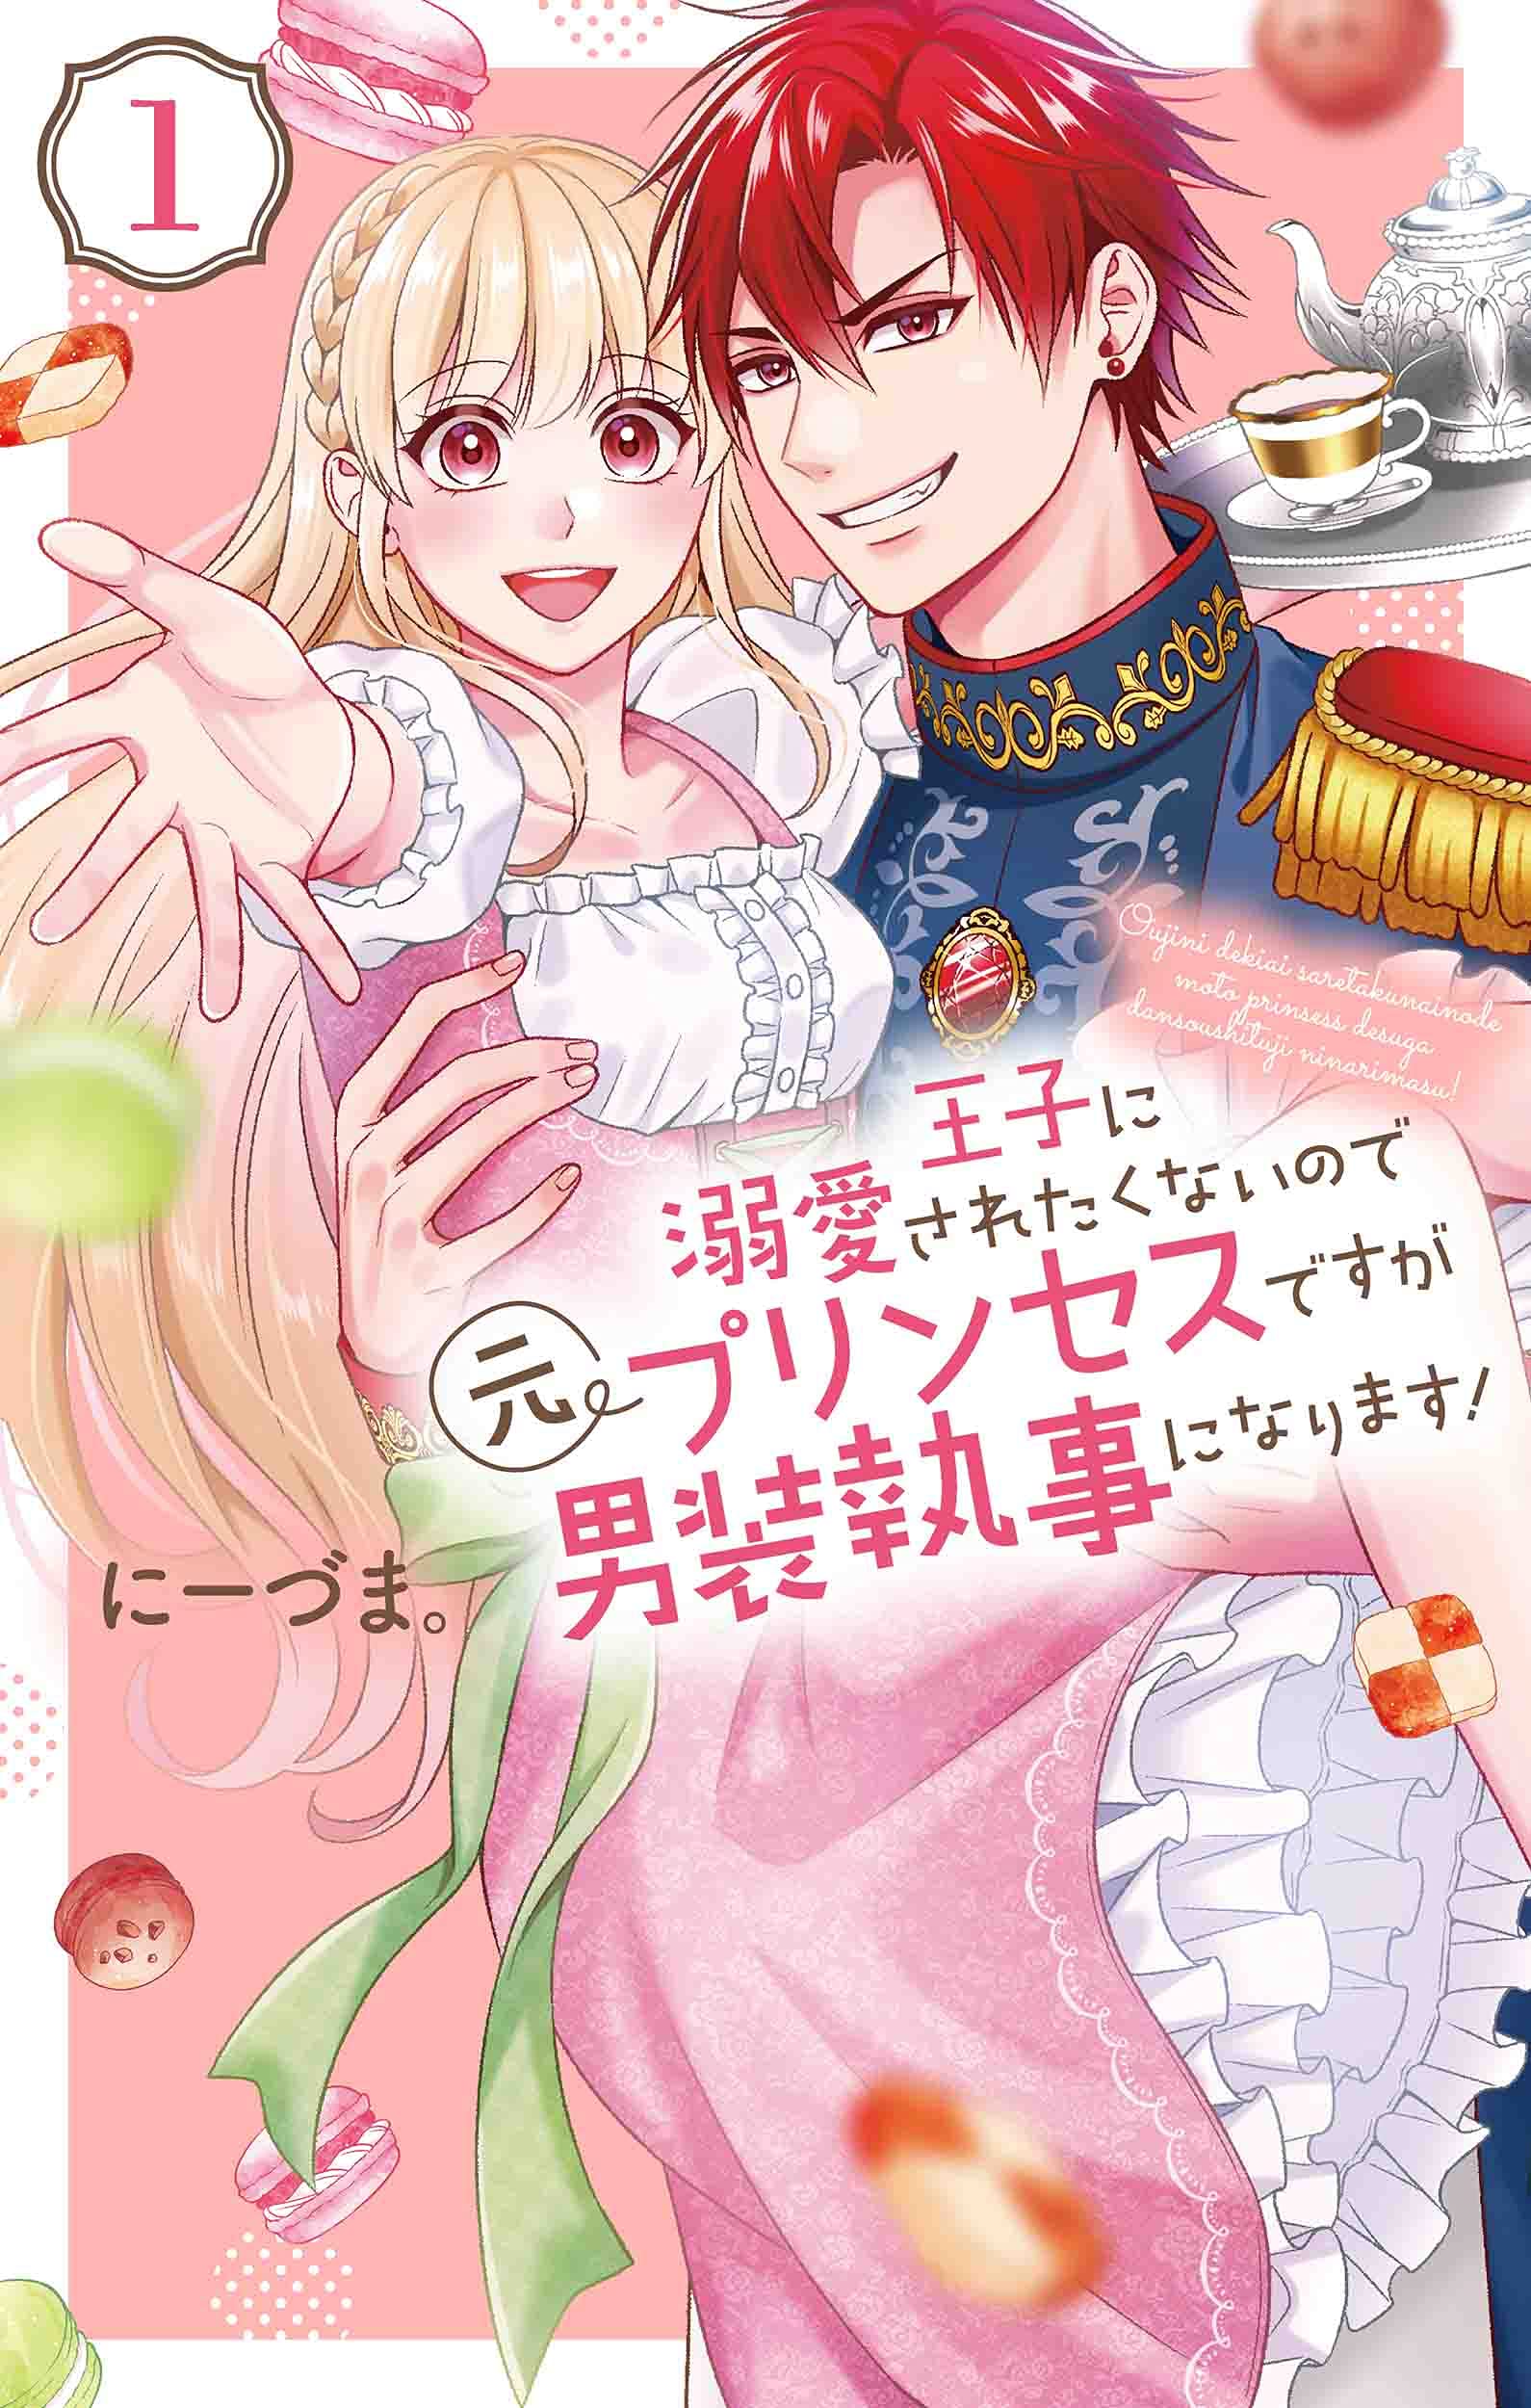 Comikey Launches Hakusensha Series, “Disguised as a Butler, the Former  Princess Evades the Prince's Love!”